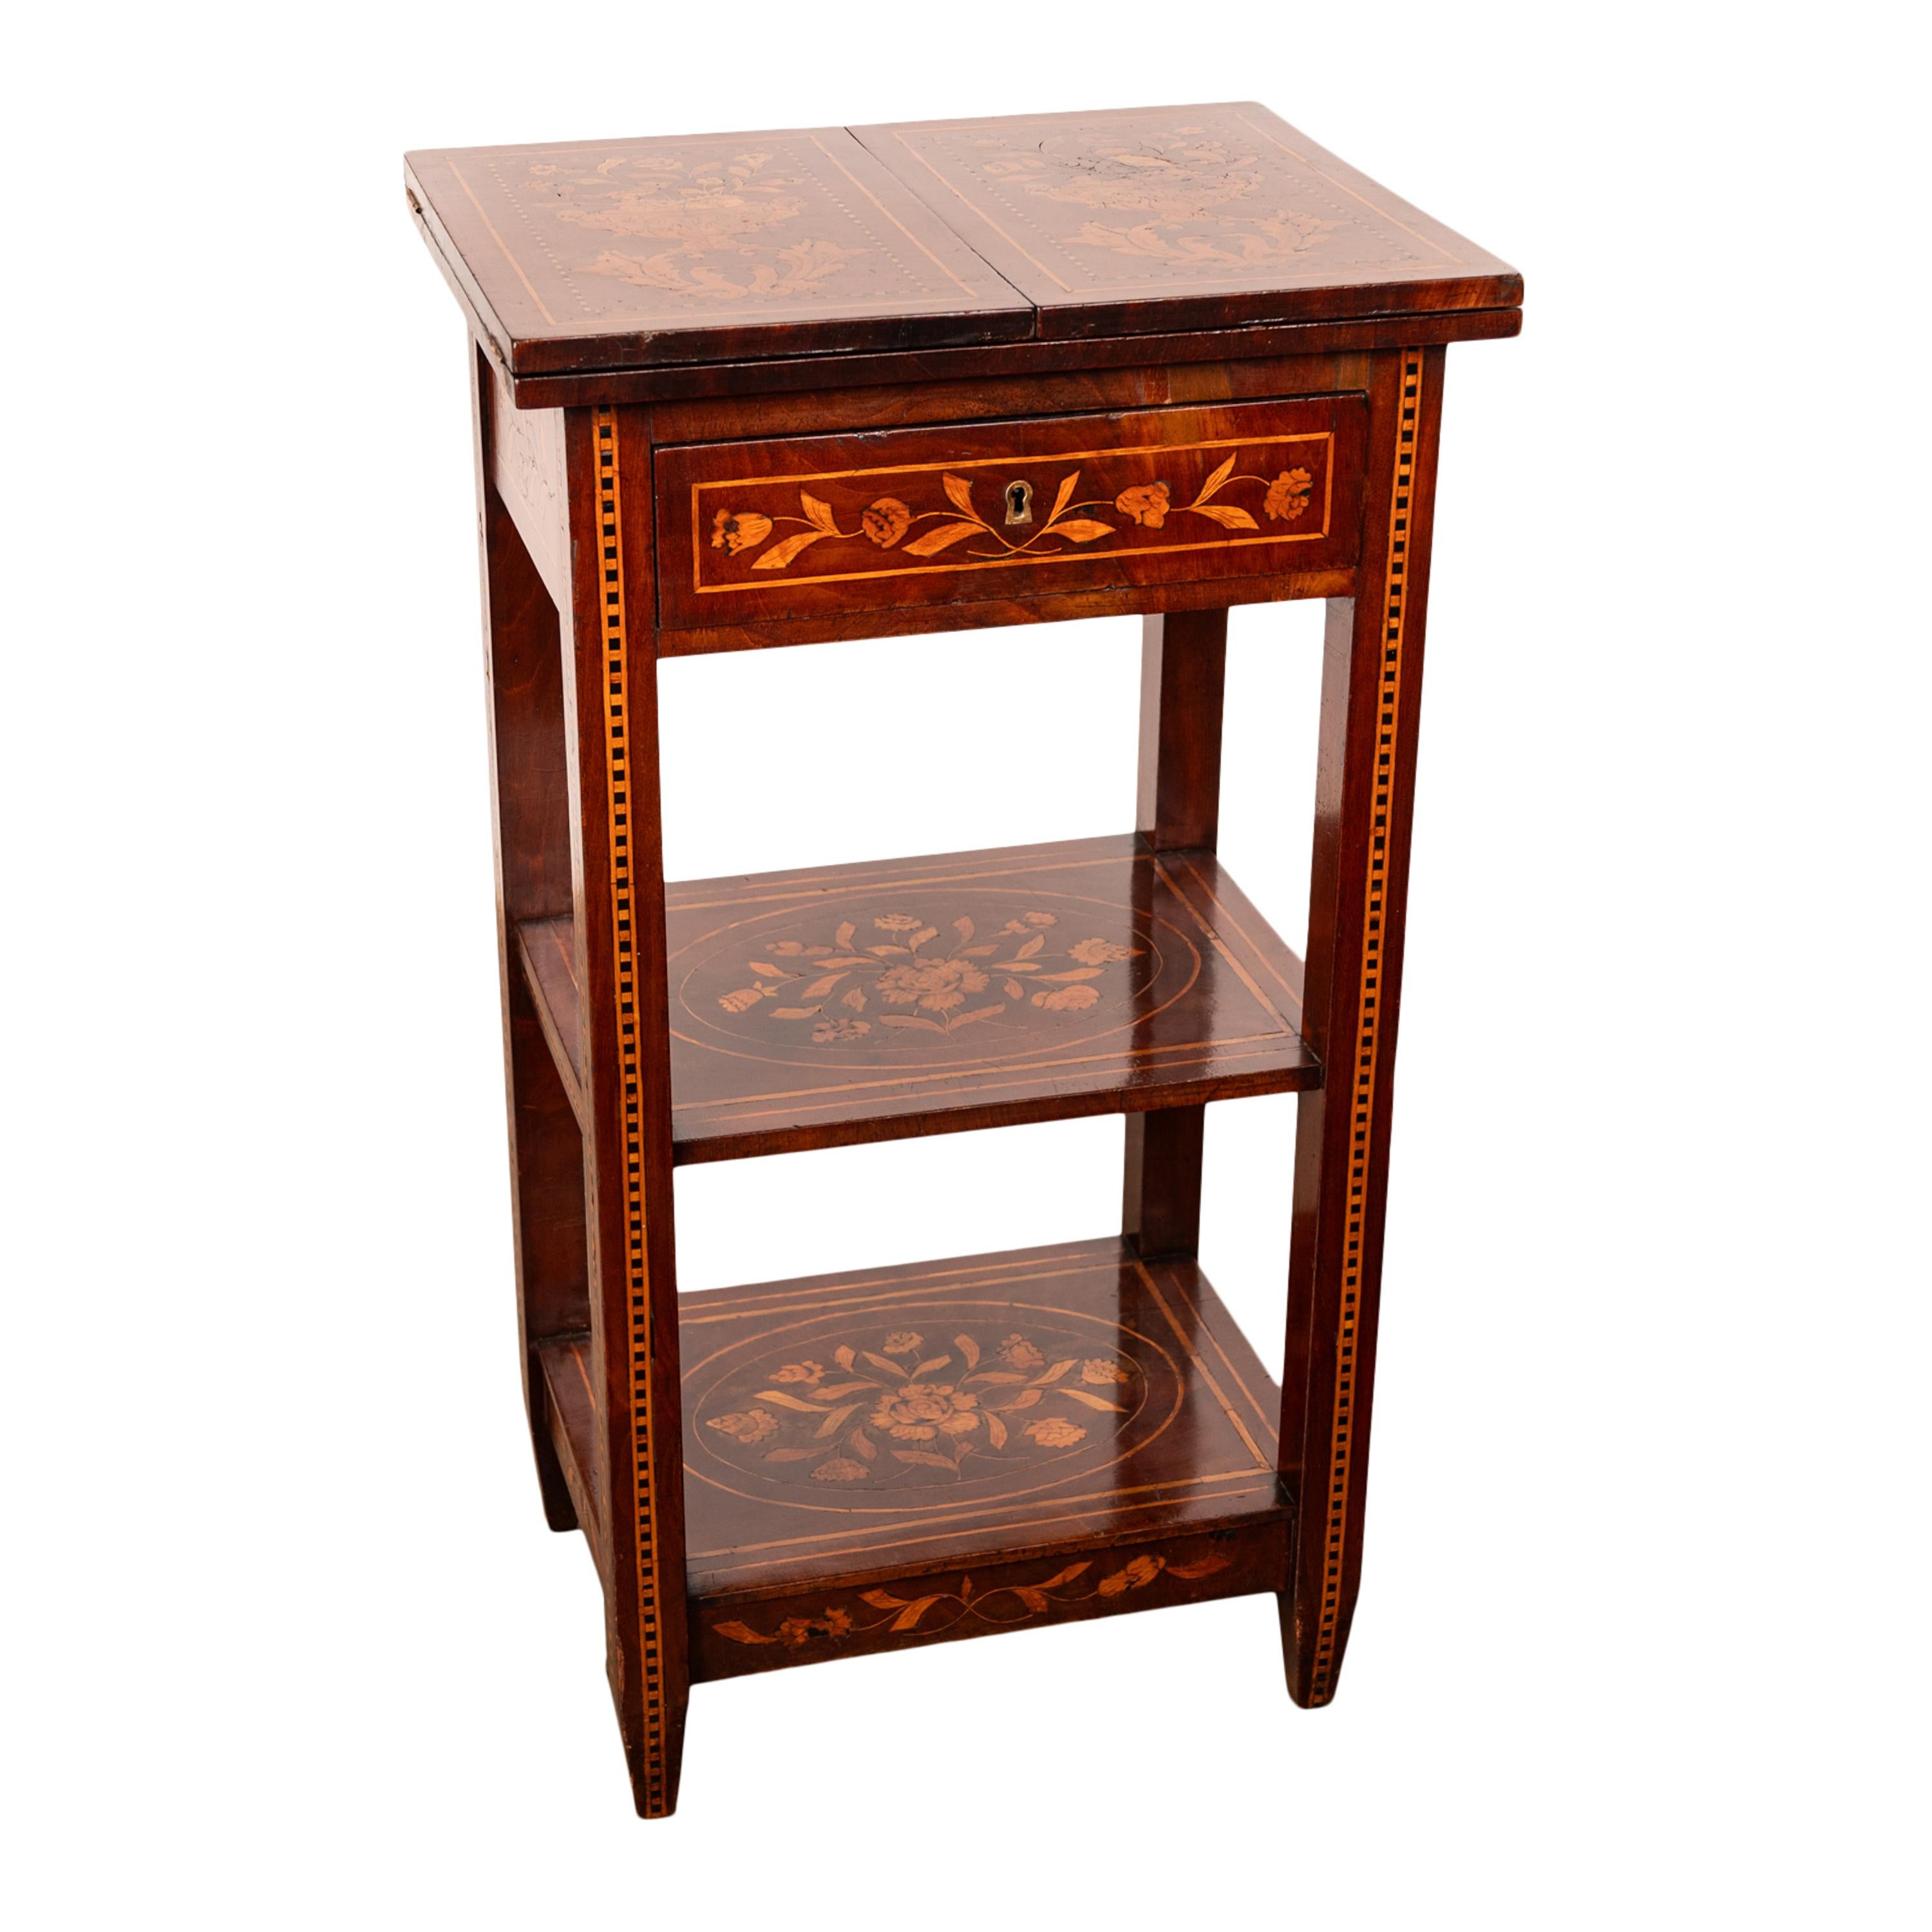 English Antique Dutch Georgian Marquetry Foldout Rosewood Satinwood Table Etagere 1820 For Sale